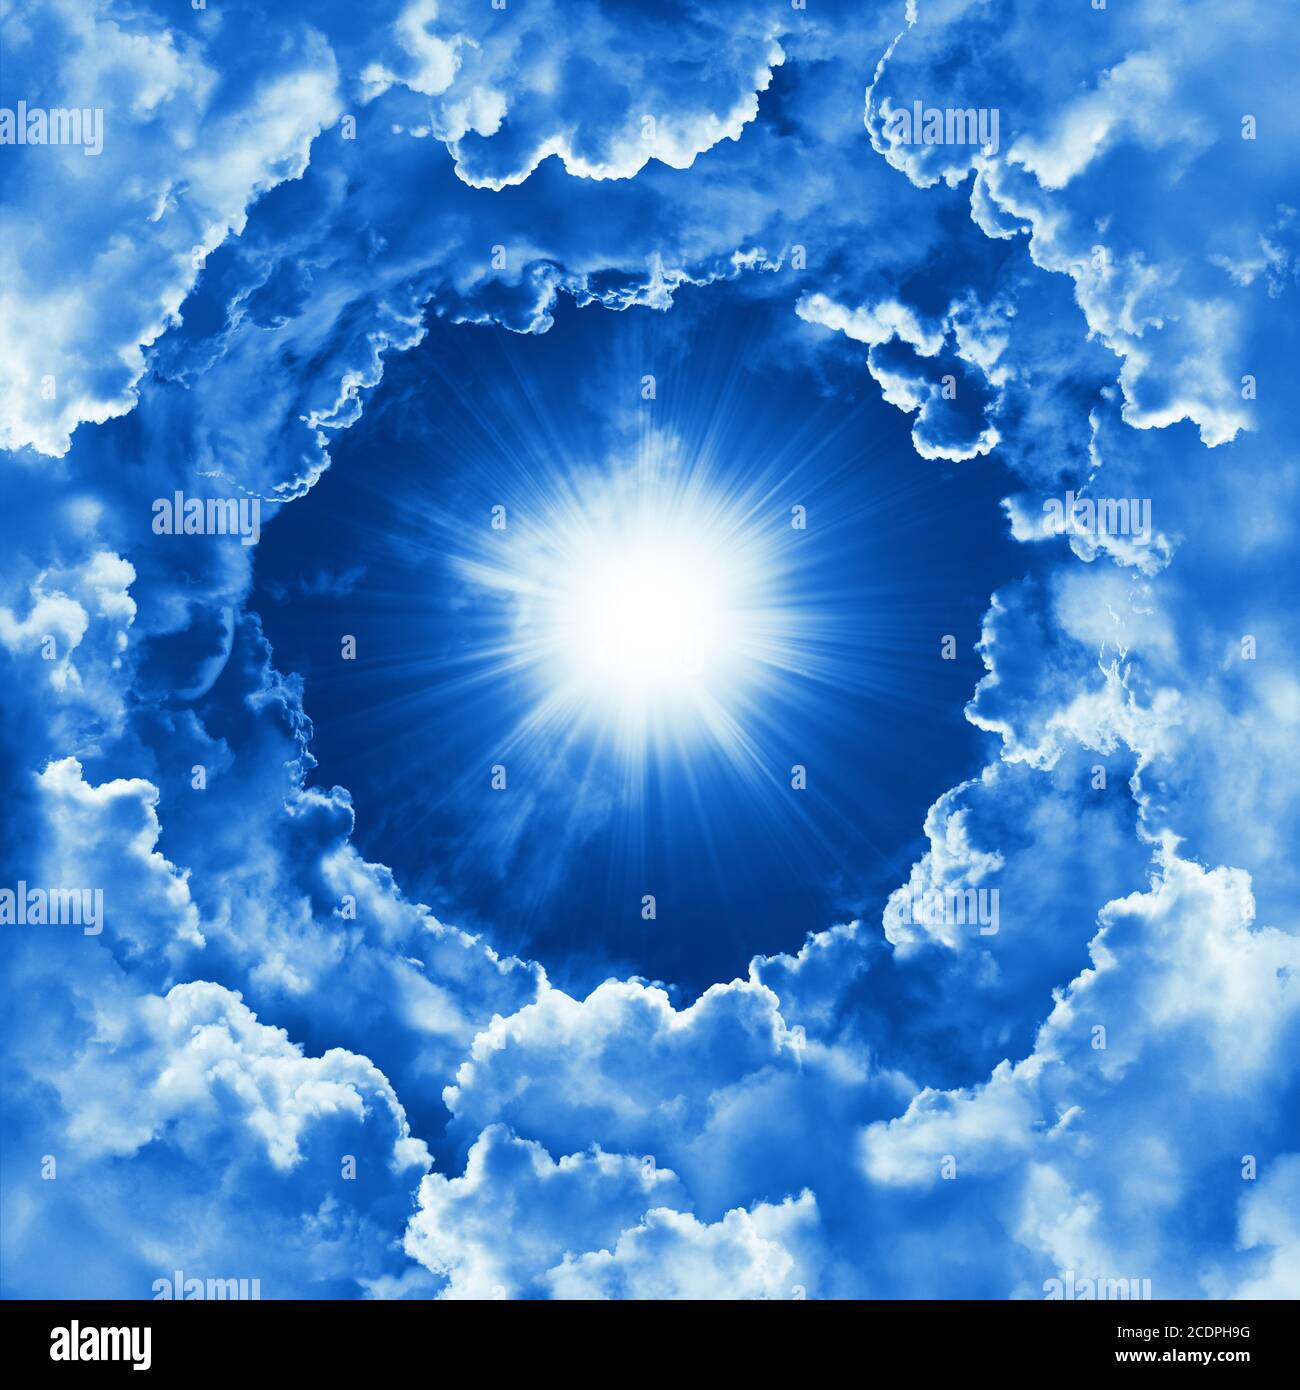 Heavenly Background With Dramatic Clouds Religion Concept Of Divine Shining Heaven Light Sky With Beautiful Cloud And Sunshine Peaceful Nature Sky Stock Photo Alamy